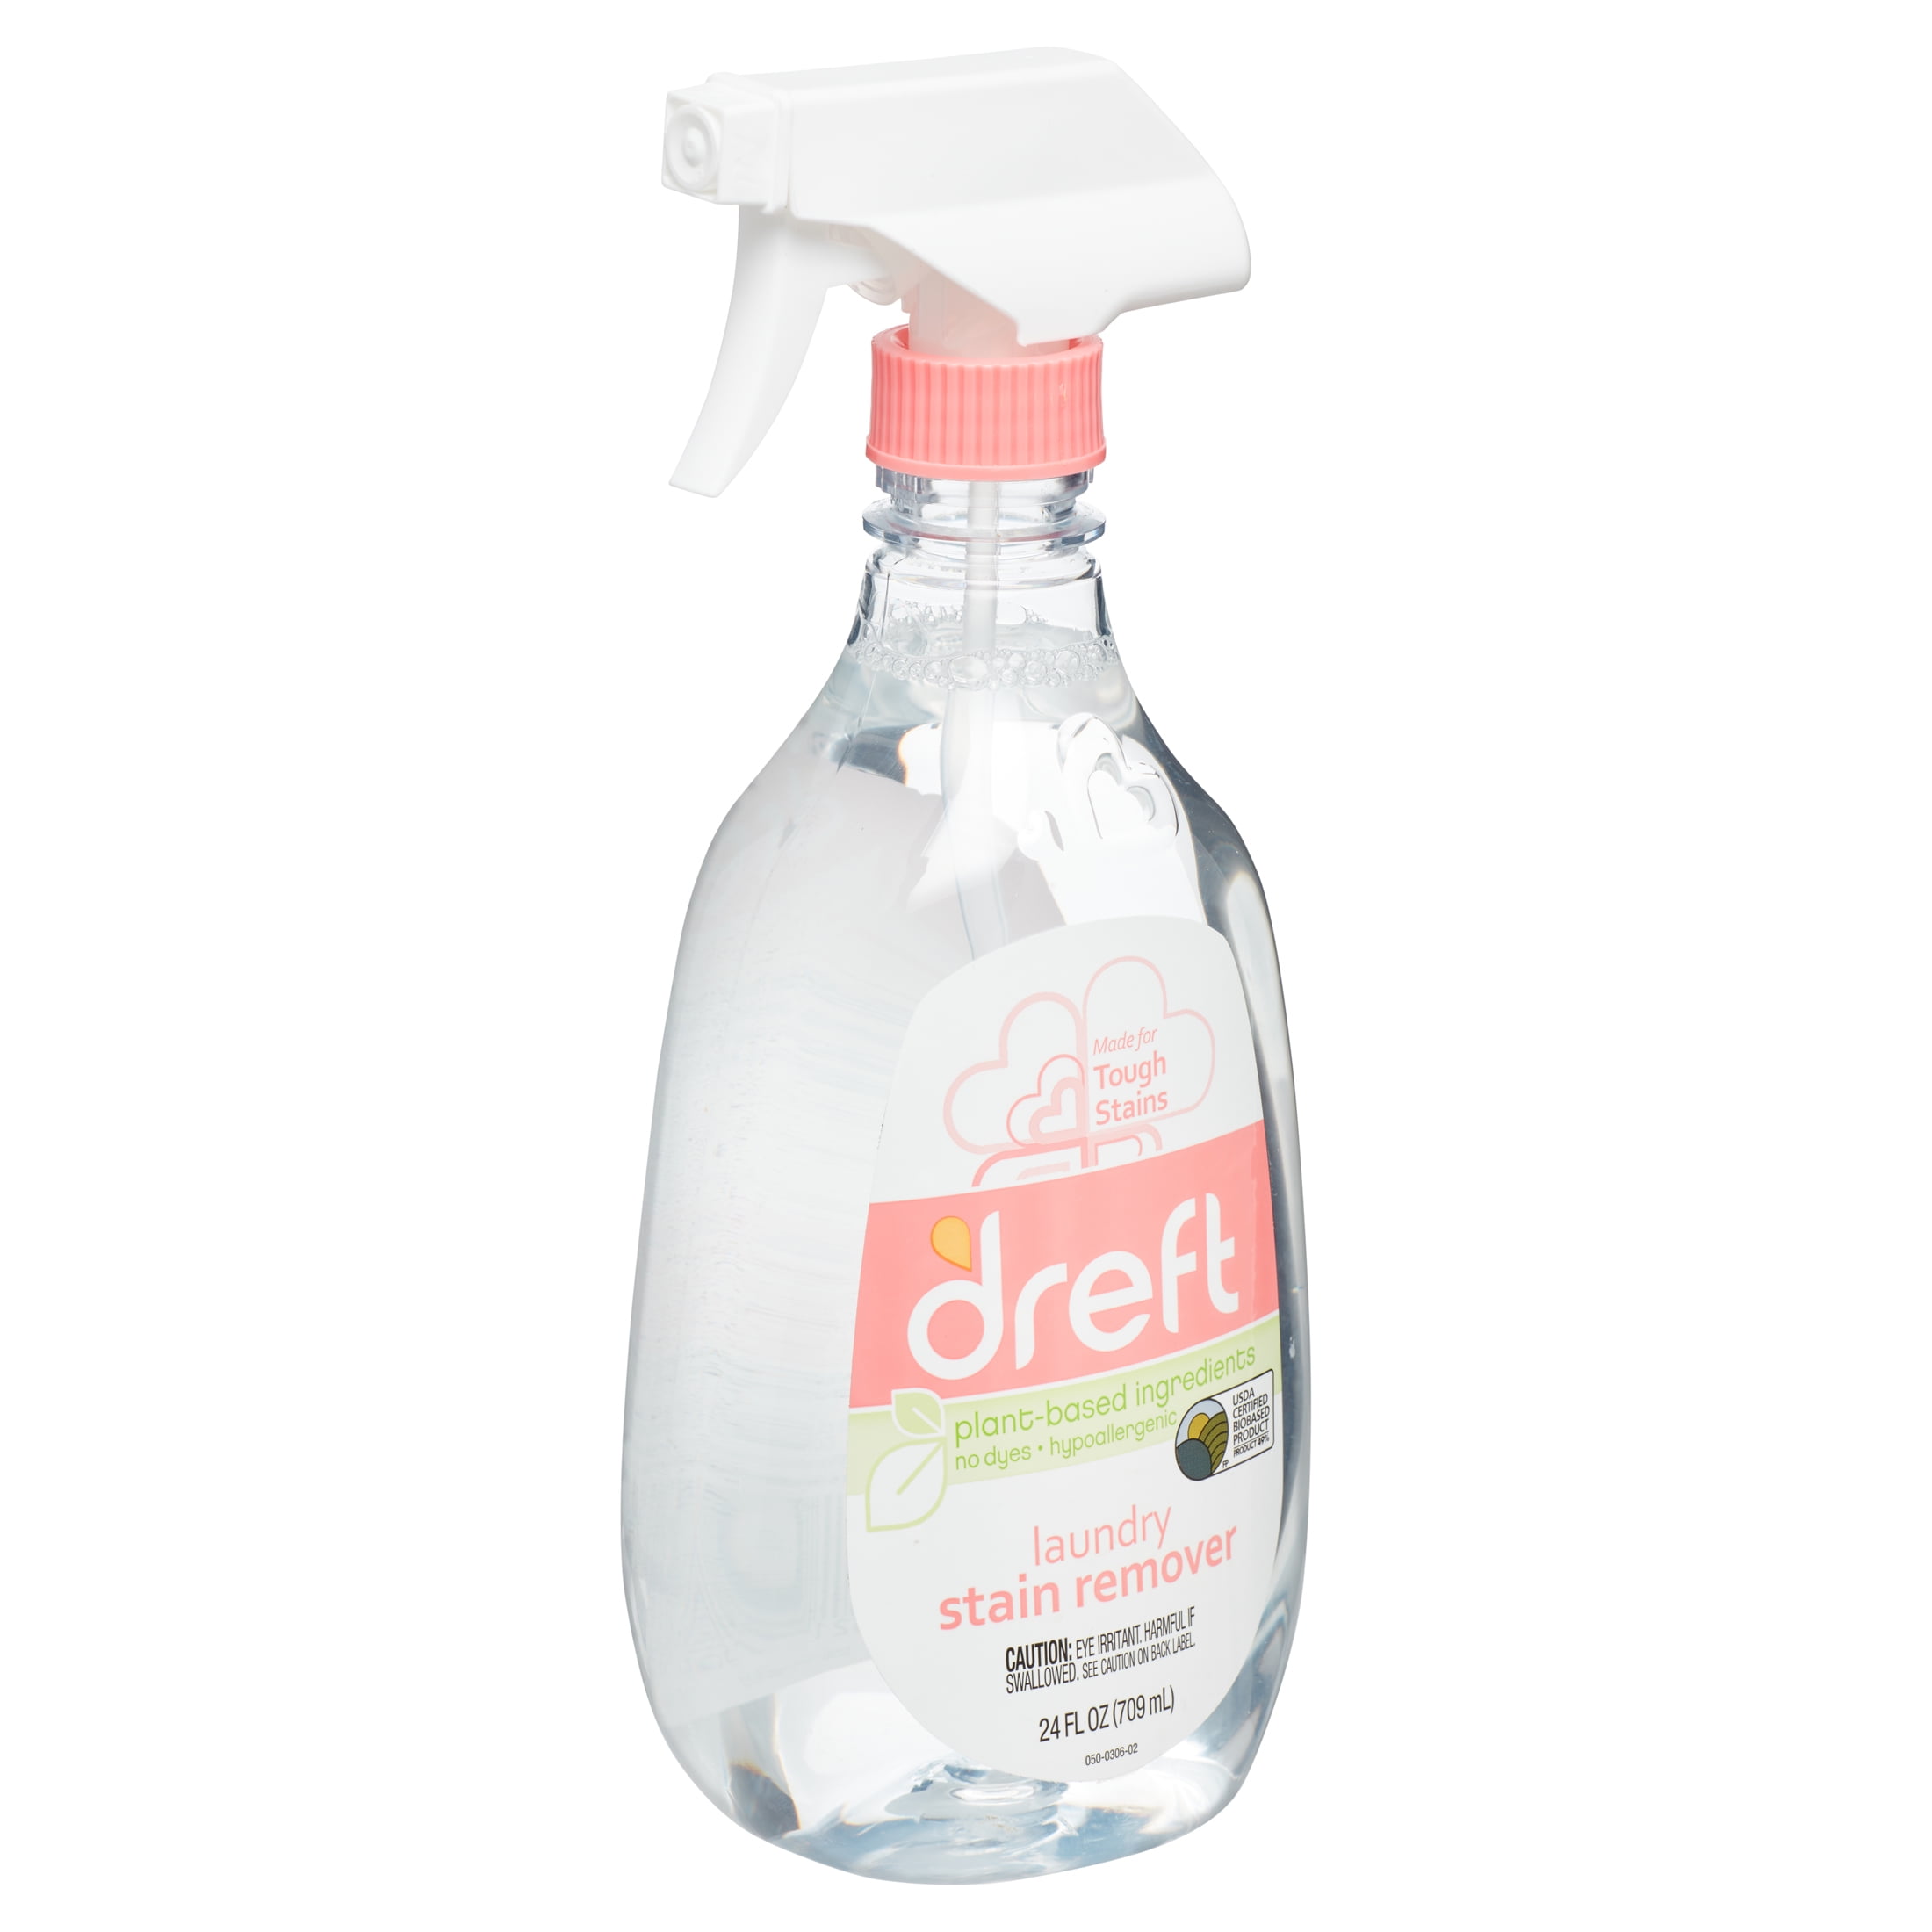 Seize the Deal on Dreft Stain Remover for just $0.77 with an all